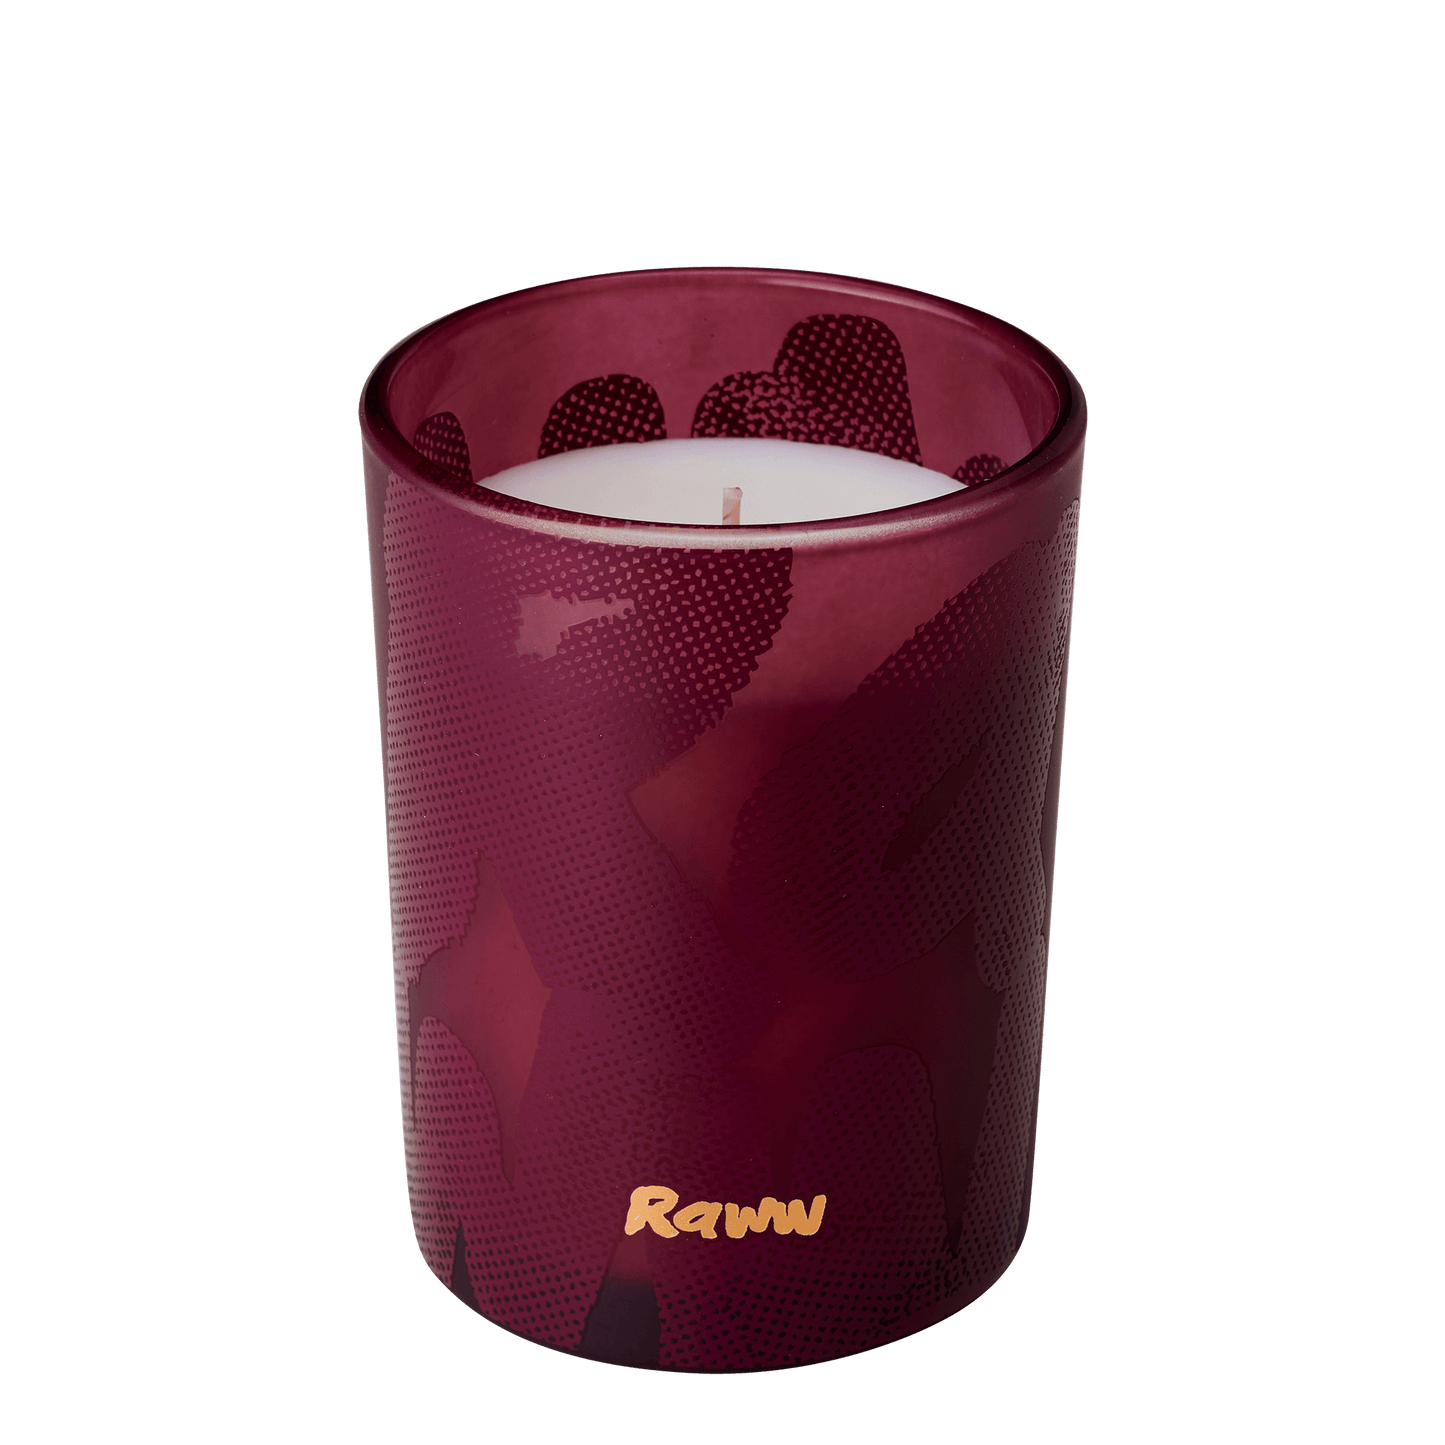 Scented Soy Candle (Pomegranate & Acai)